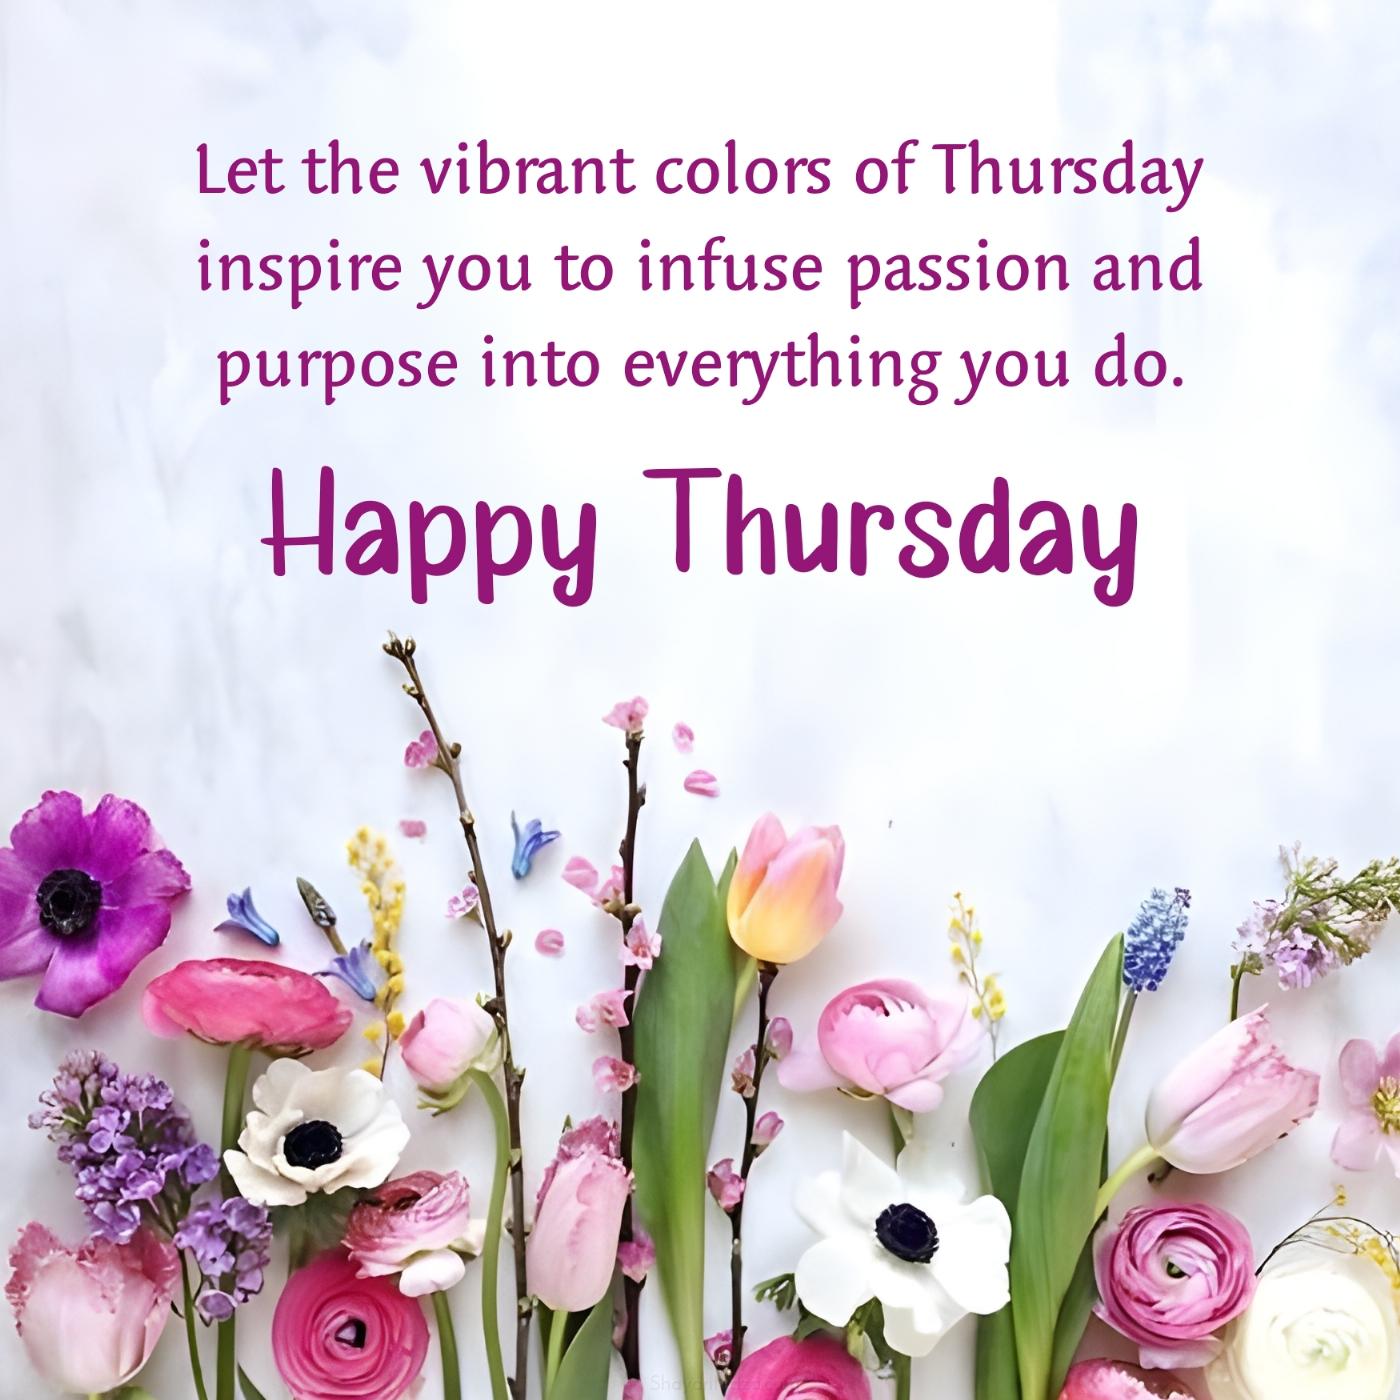 Let the vibrant colors of Thursday inspire you to infuse passion and purpose